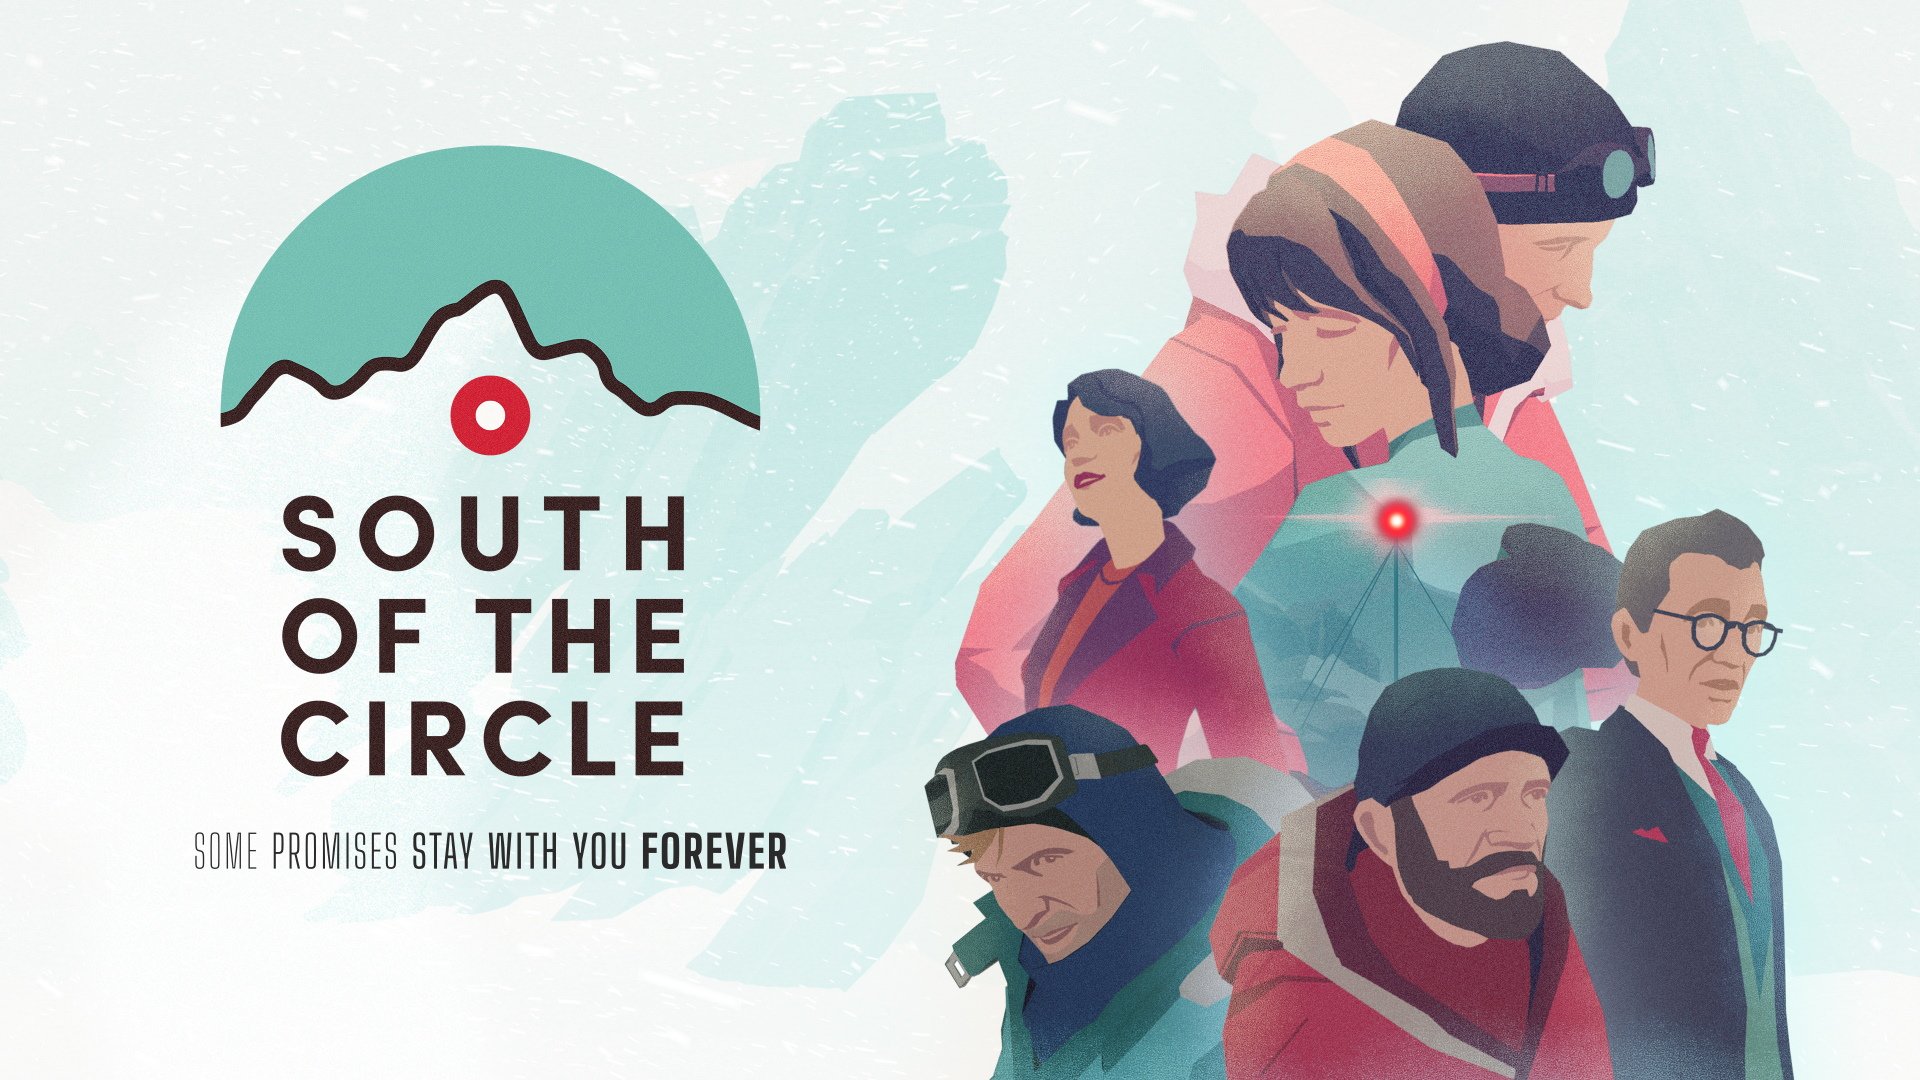 Video For South of the Circle, a Narrative Drama About Love and Promises, Comes to Xbox